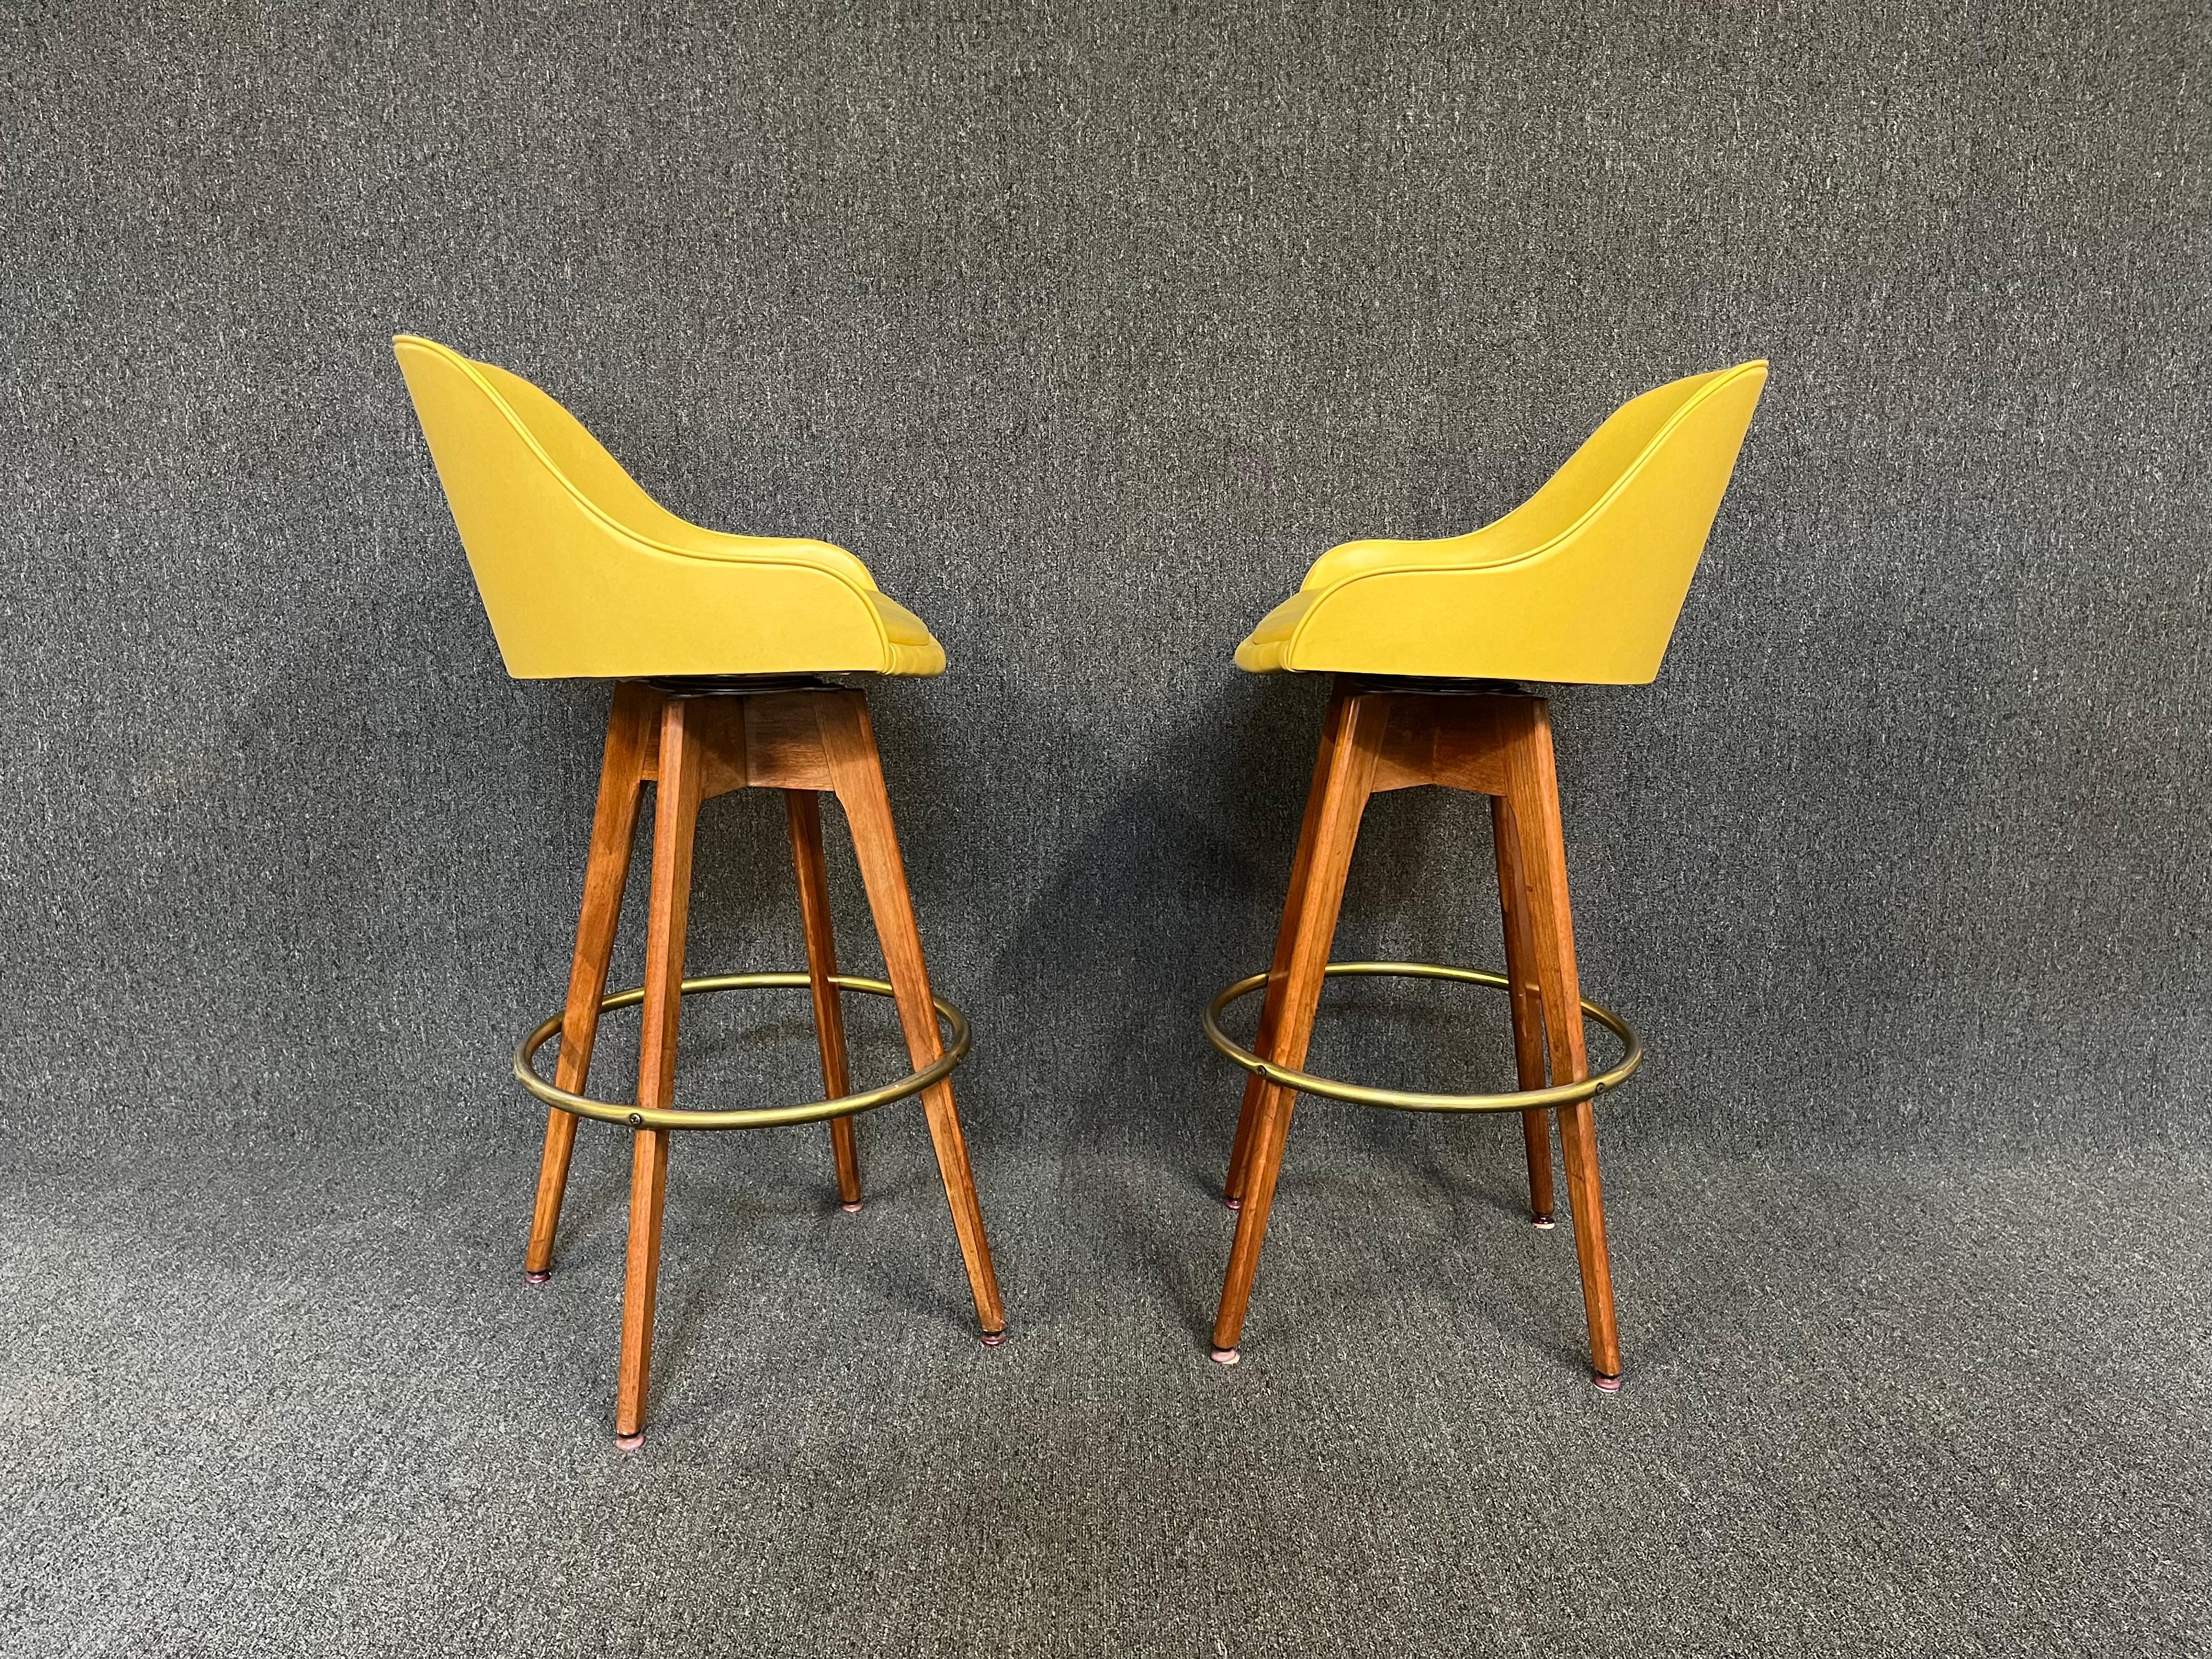 Here is a killer pair of vintage mid century bar stools by Chet Beardsley. Original yellow vinyl fabric is in great vintage condition with minimal wear. Solid black walnut frames are in great condition as well.

These are BAR HEIGHT
